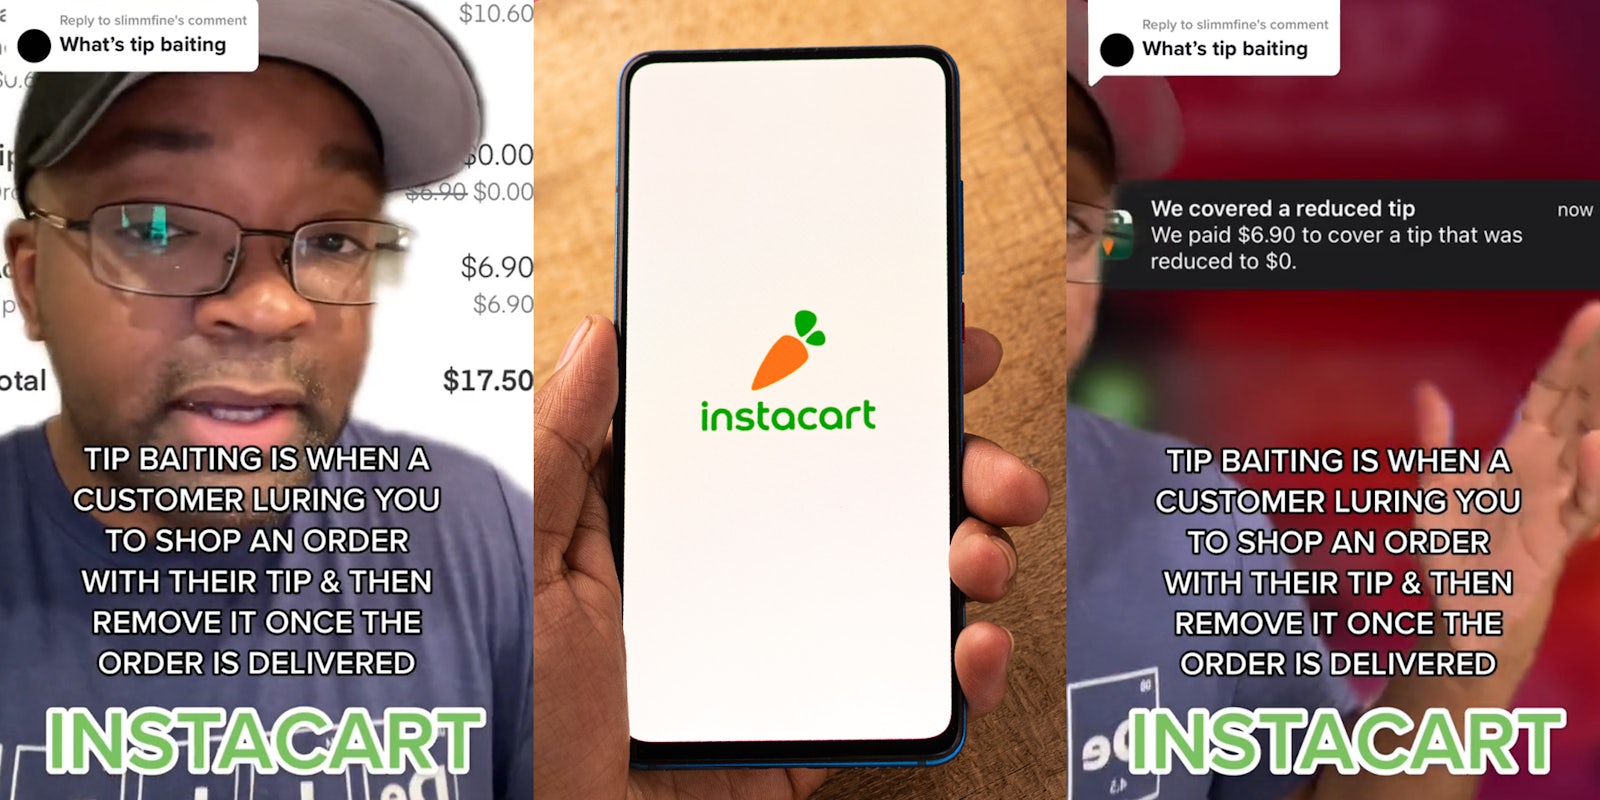 Instacart shopper greenscreen TikTok over Instacart pay caption 'what's tip baiting' 'TIP BAITING IS WHEN A CUSTOMER LURING YOU TO SHOP AN ORDER WITH THEIR TIP & THEN REMOVE IT ONCE THE ORDER IS DELIVERED INSTACART' (l) Instacart on phone in hand in front of tan background (c) Instacart shopper greenscreen TikTok over Instacart reduced tip pay caption 'what's tip baiting' 'TIP BAITING IS WHEN A CUSTOMER LURING YOU TO SHOP AN ORDER WITH THEIR TIP & THEN REMOVE IT ONCE THE ORDER IS DELIVERED INSTACART' (r)